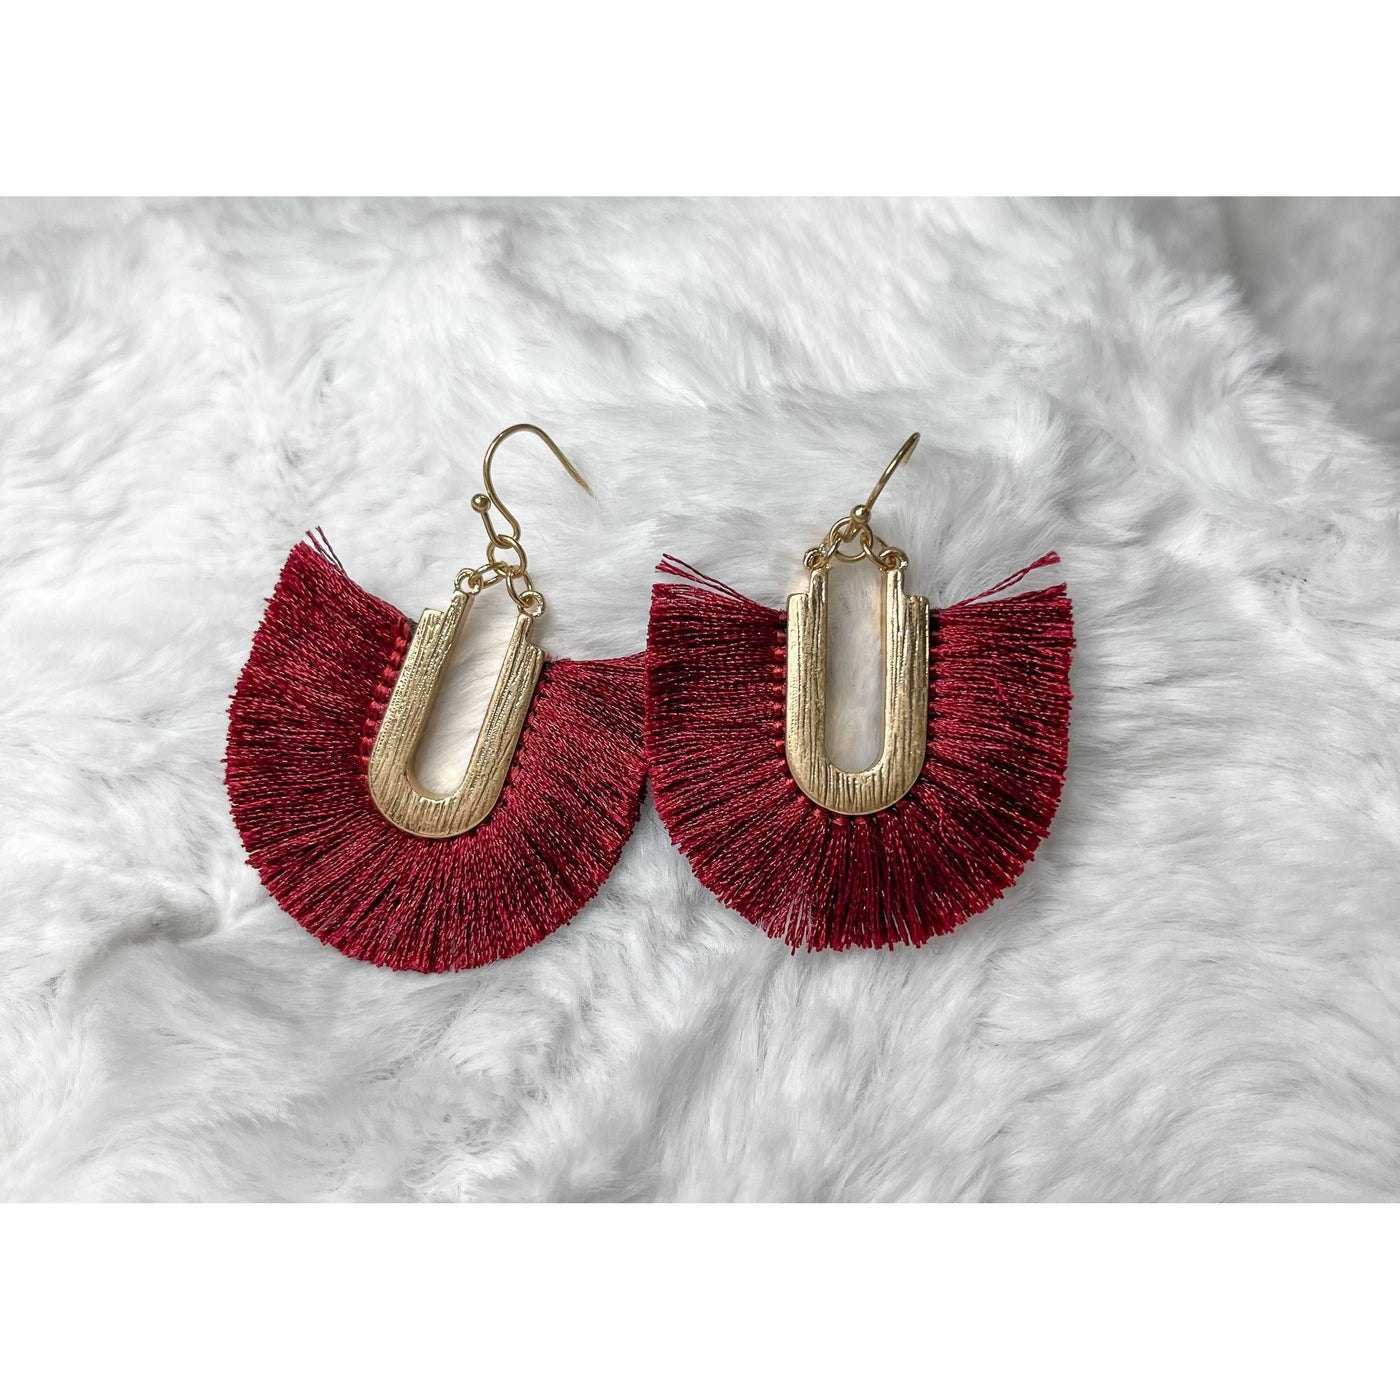 Alyss Earrings in Wine-W Jewelry-Graceful & Chic Boutique, Family Clothing Store in Waxahachie, Texas